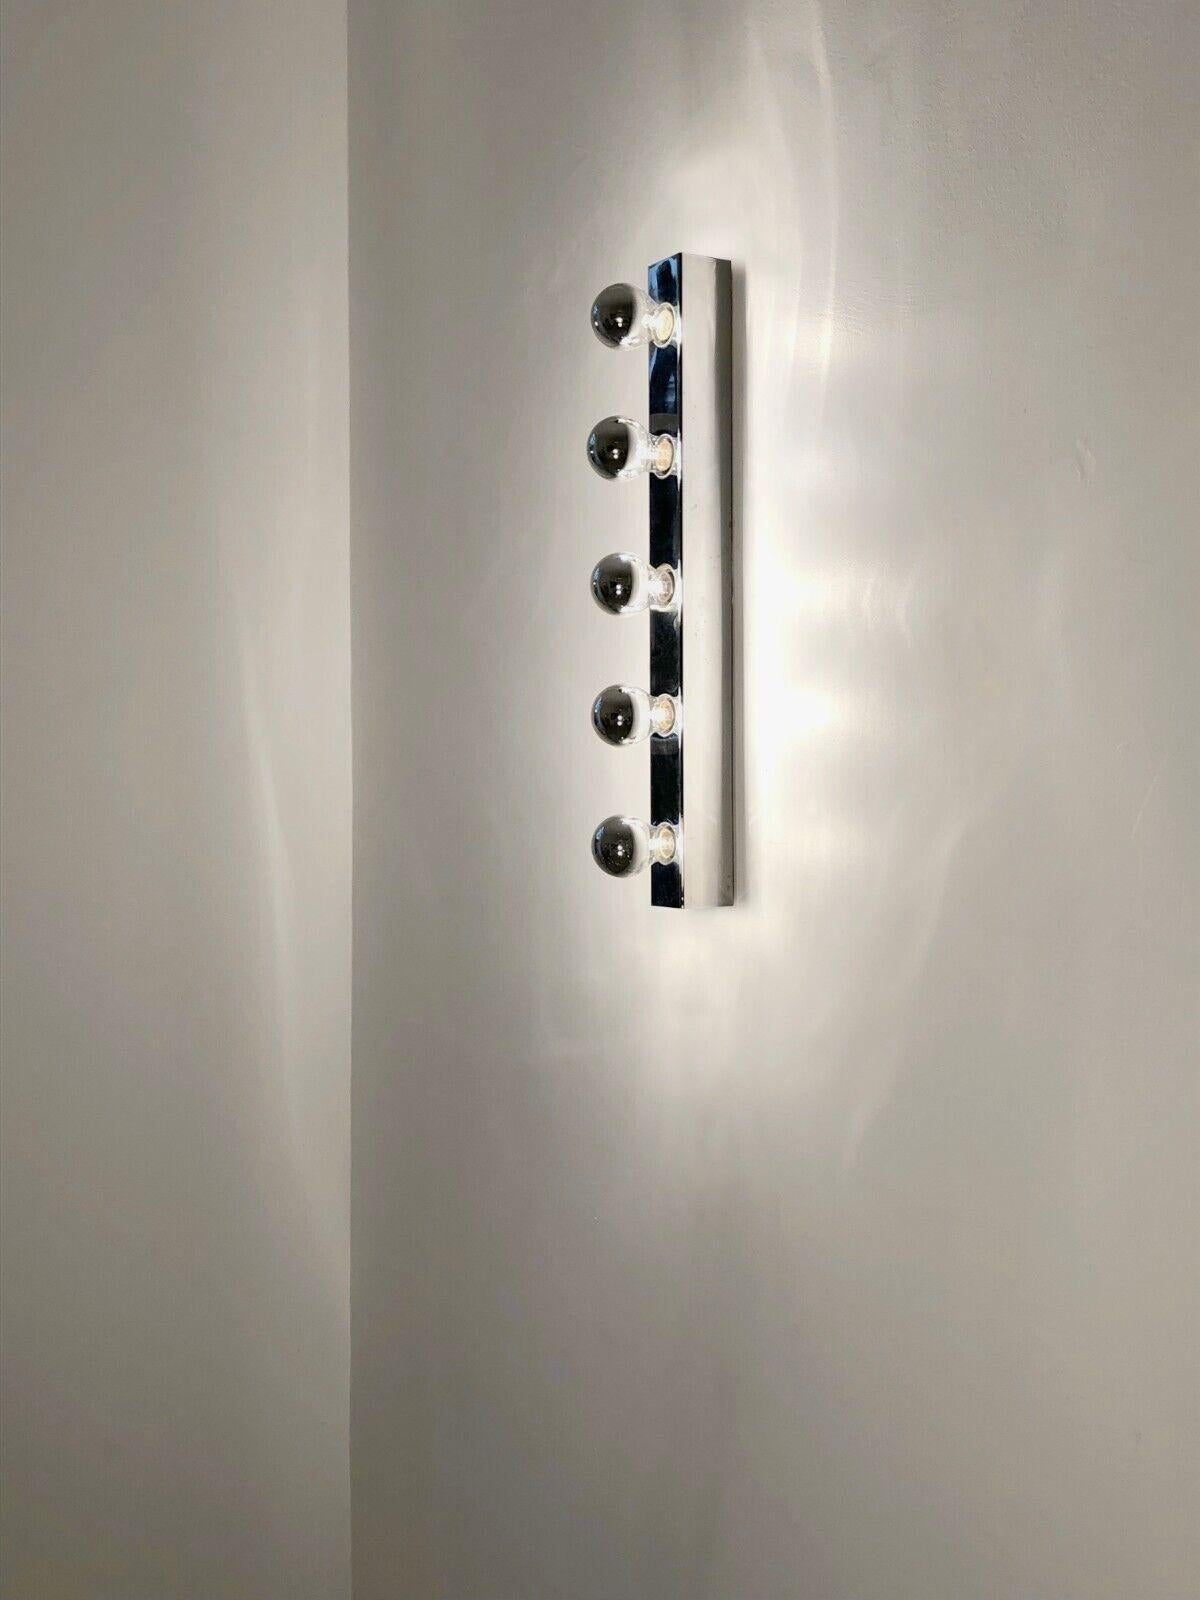 A large wall light or wall light bar type artist's dressing room or bathroom, Minimalist, Pop, Modernist, Space-Age, long rectangular base in chrome metal with rounded edges, with 5 circular openings for 5 screw bulbs creating a beautiful graphic